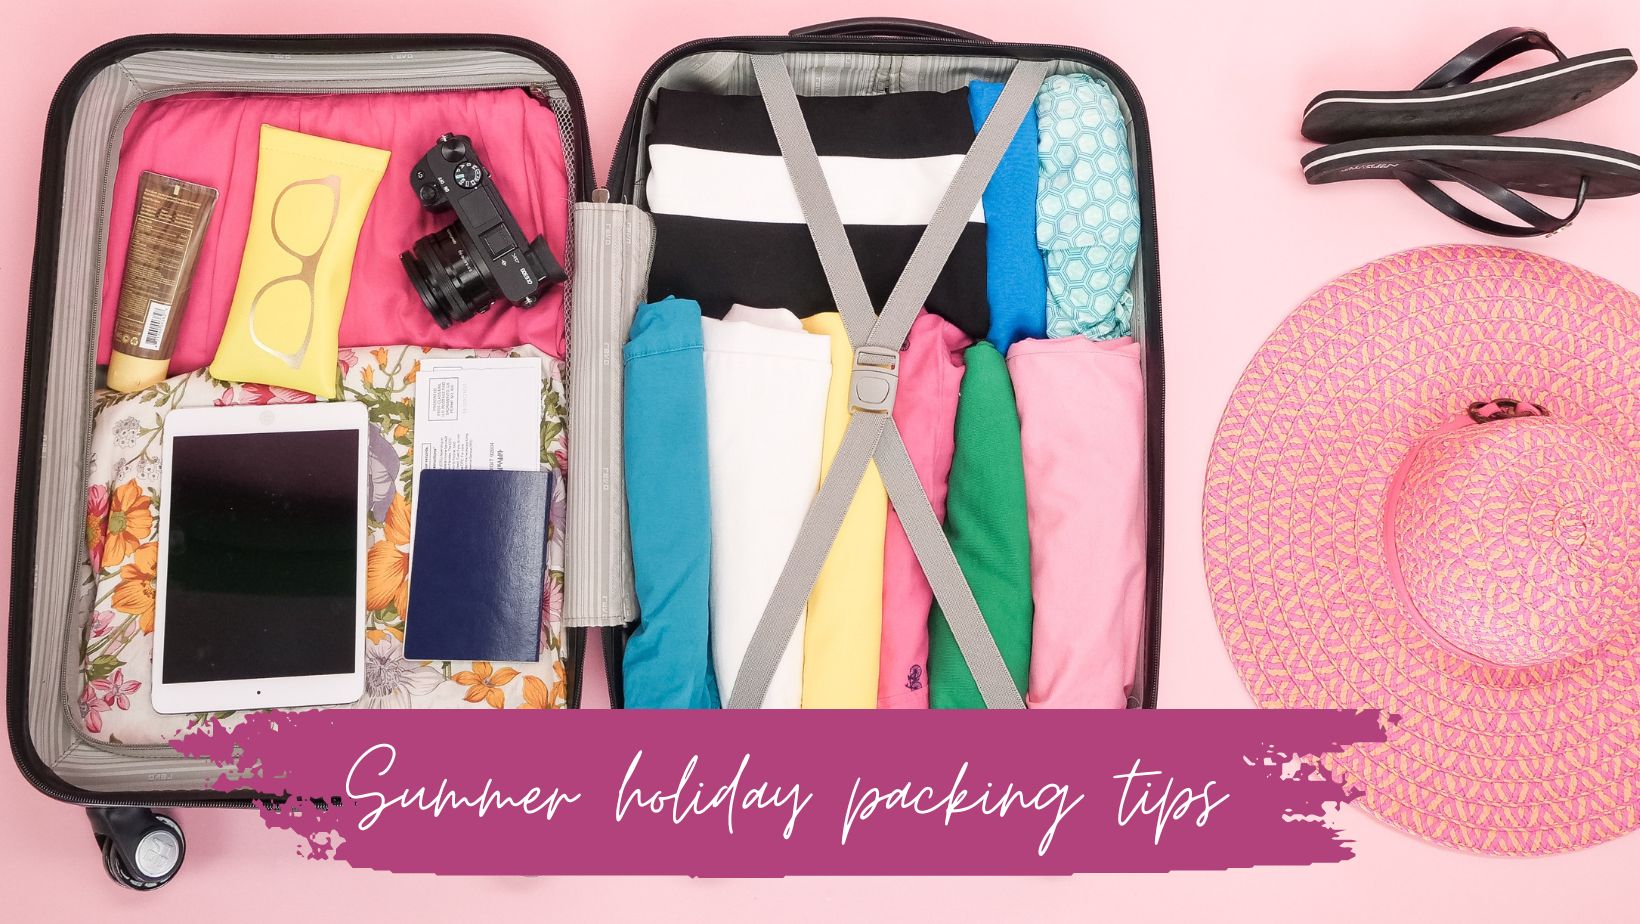 Tips to get the most from your holiday packing